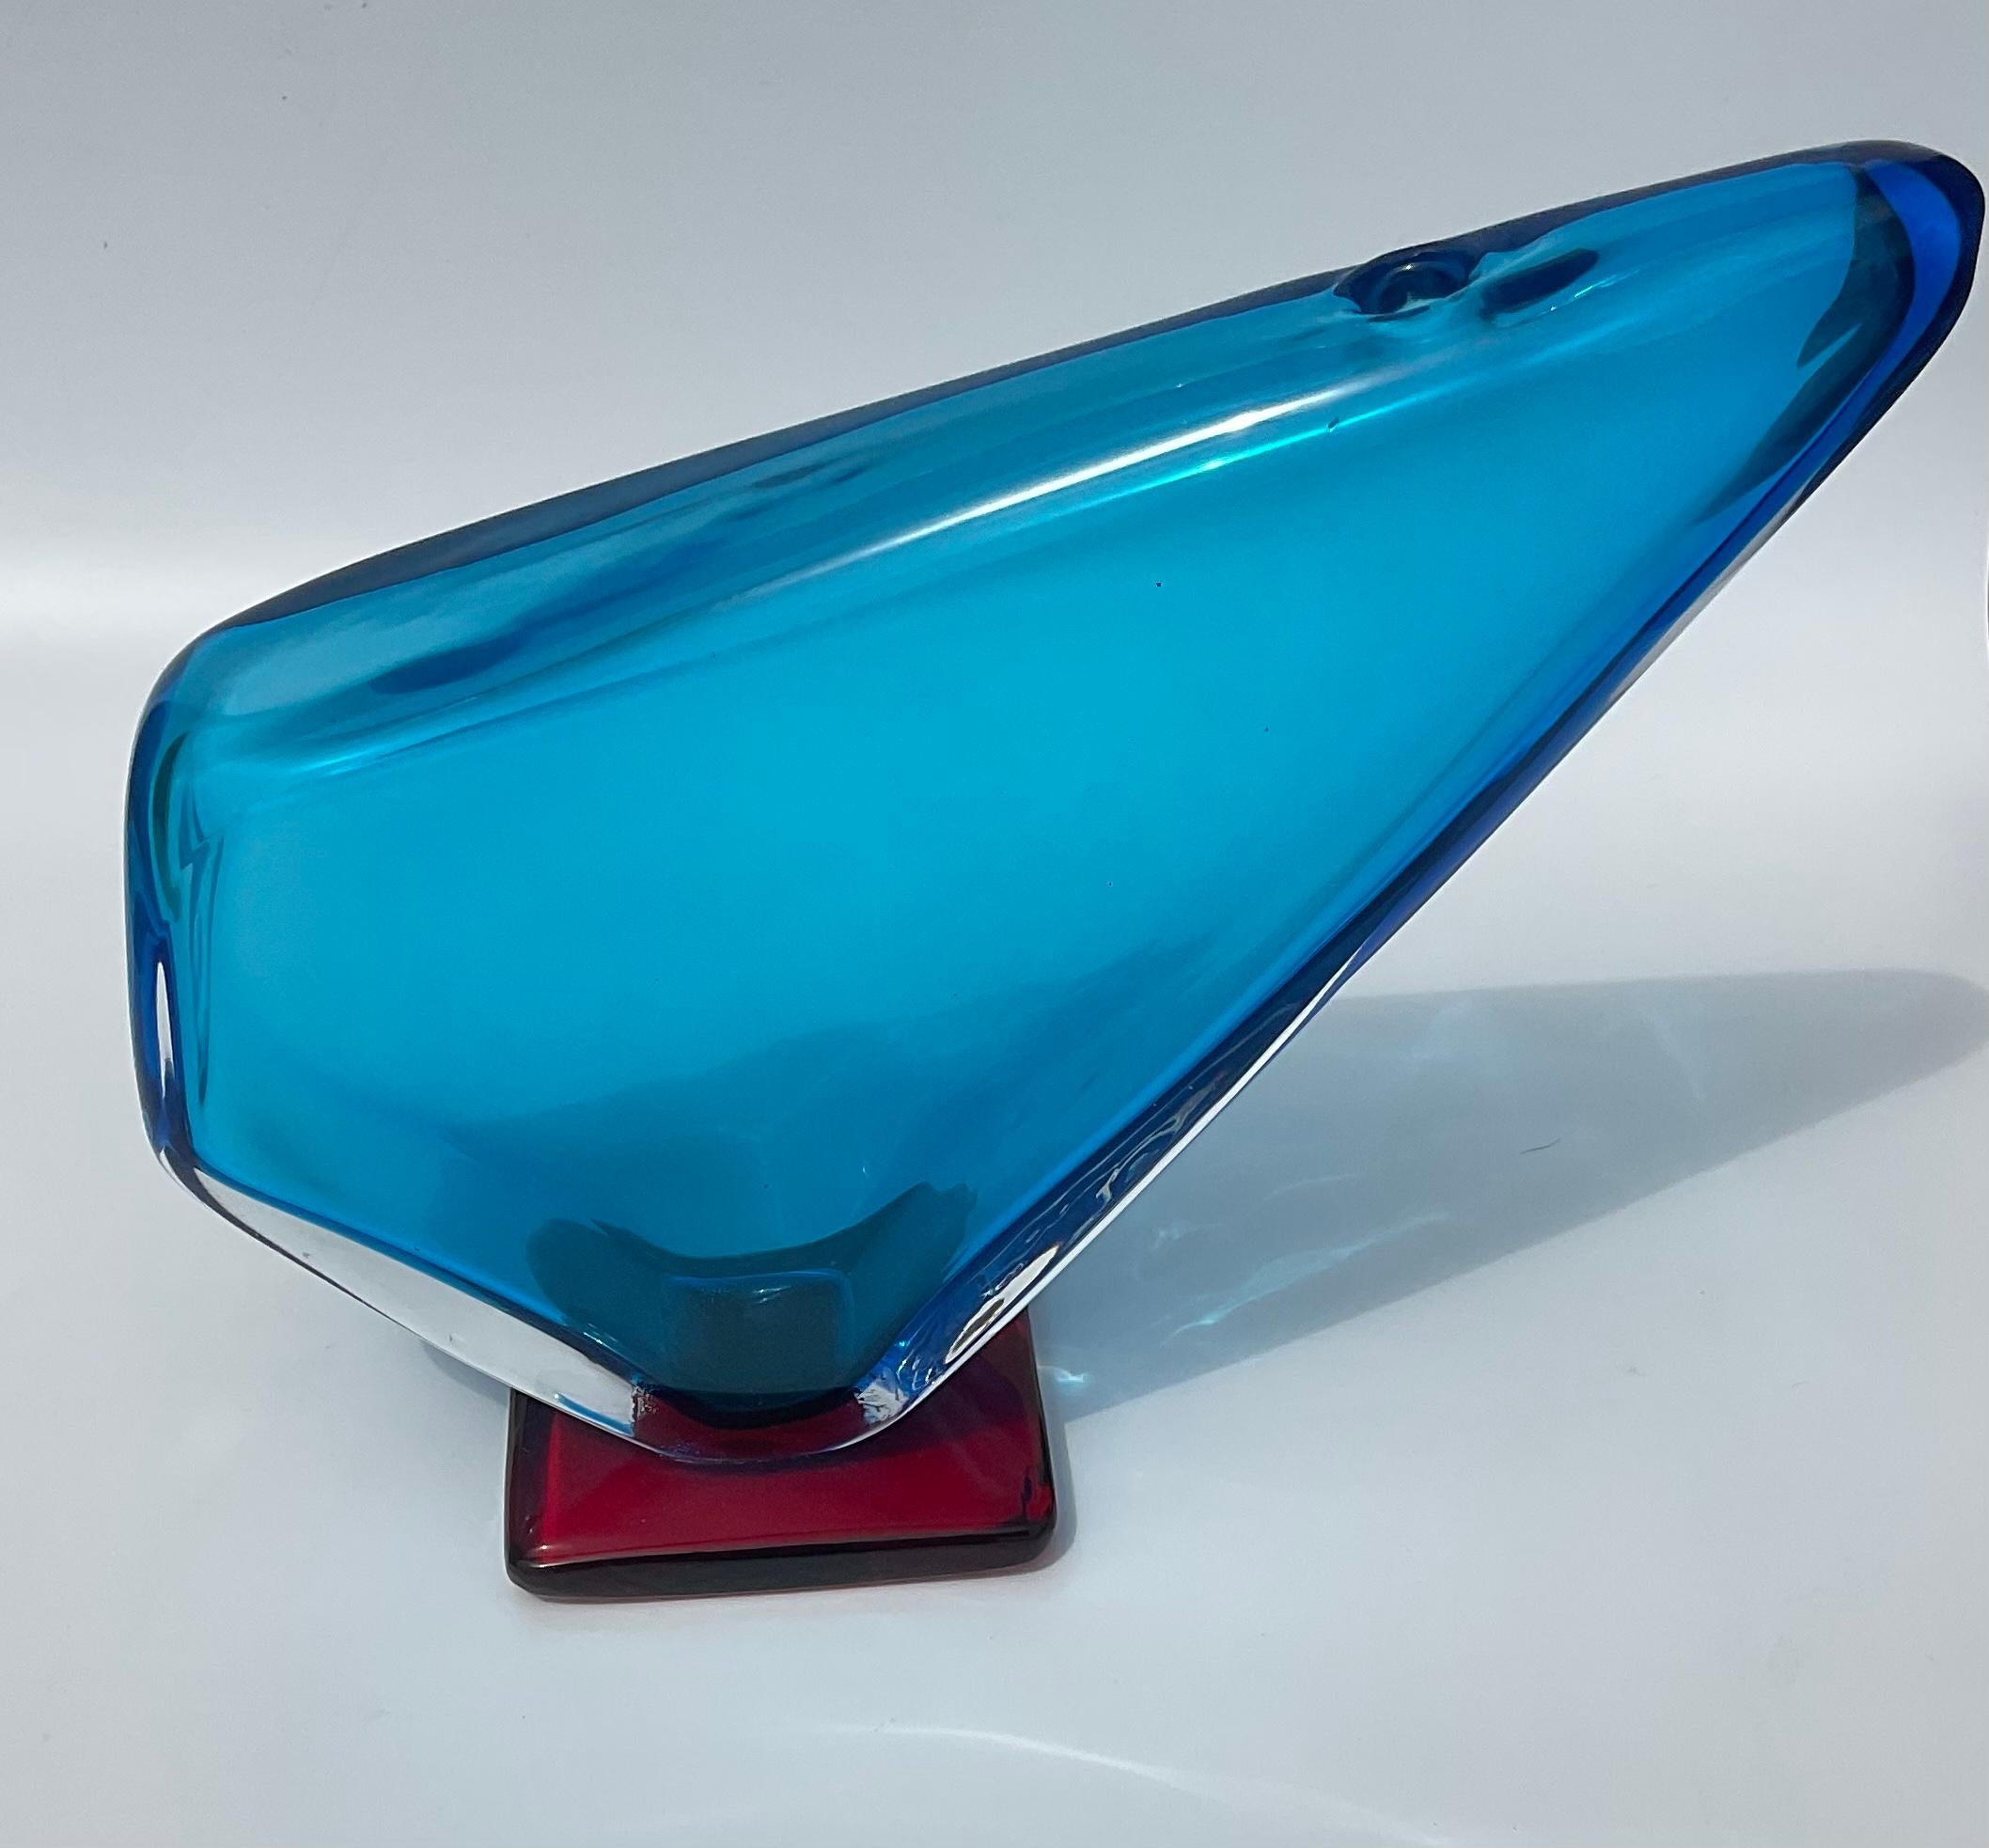 Alfredo Barbini Signed Triangular Blue Murano Glass Vase with irridized surface. The vase was designed in 1962. This vase has a red applied foot and it is signed by the Artist Alfredo Barbini. Large and desirable example.